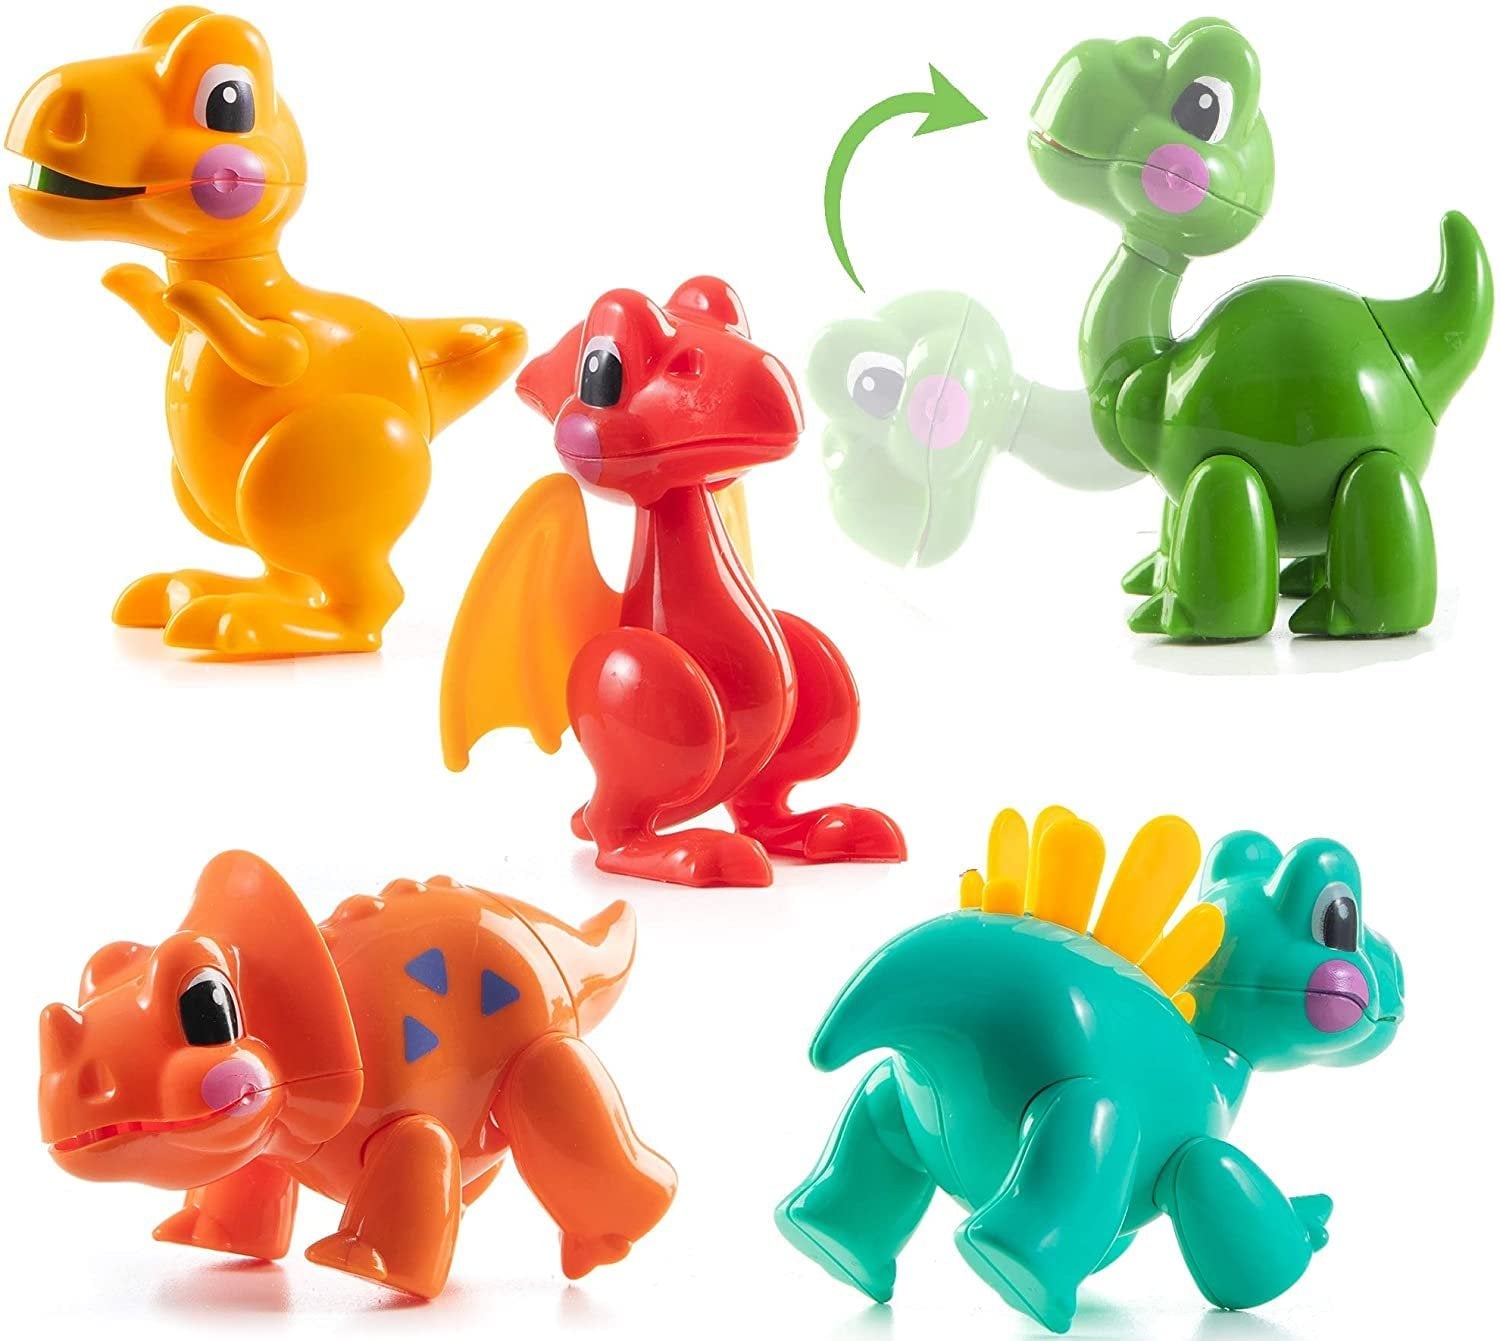 PREXTEX Small Baby Dinosaur Toys for Toddlers 3 Years and Up - Set of Cartoon Dinosaur Figures, Safe ABS Plastic with Round Edges, Perfect for Kids of All Ages, Dino-Themed Parties, and Birthday Gifts